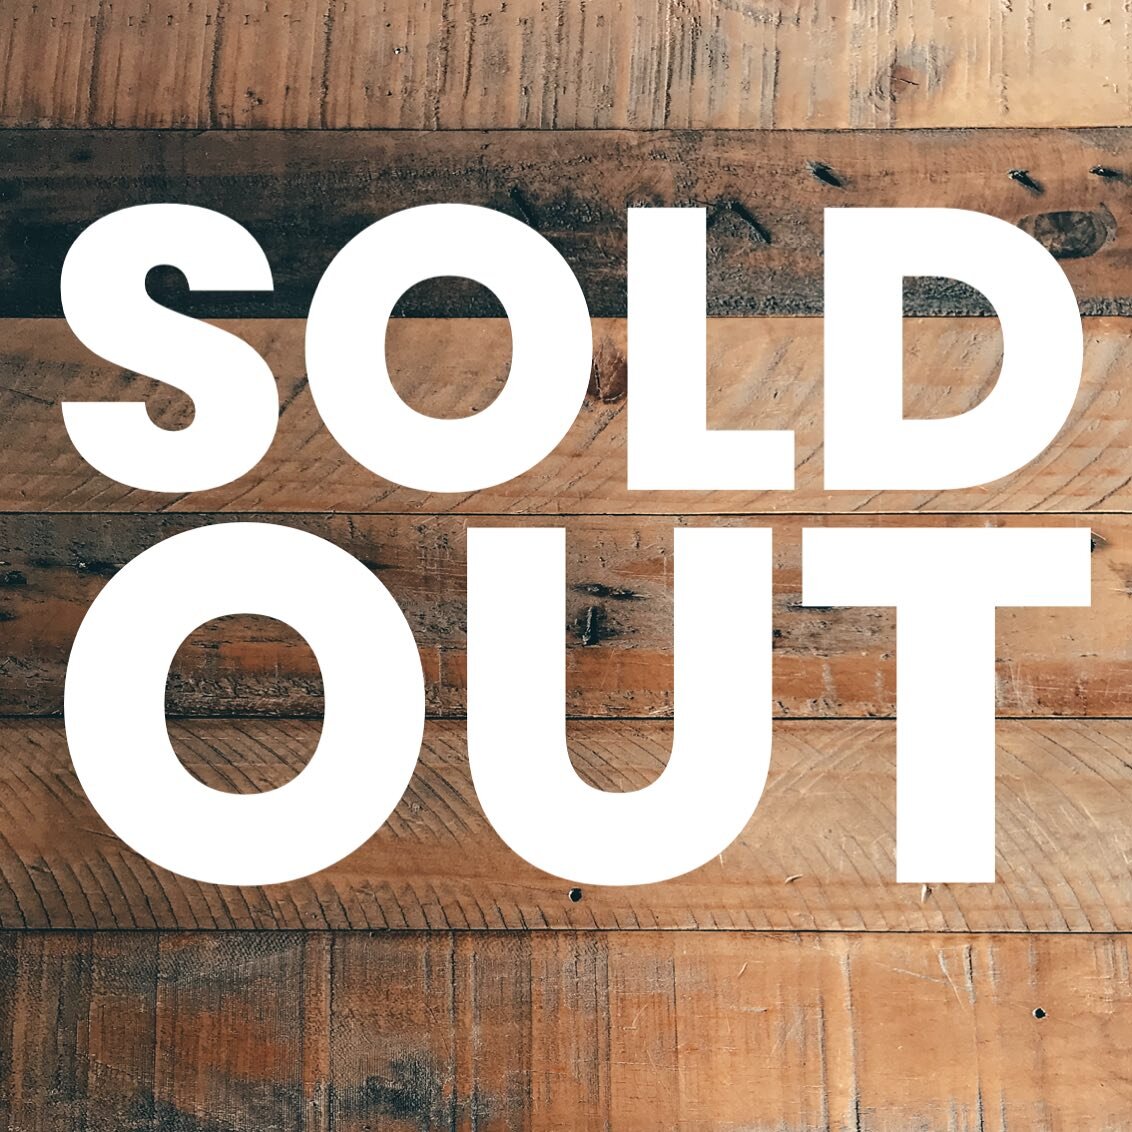 We are SOLD OUT of all of our meats for the day! Thank you guys for a great Thursday. We will be back with more meat tomorrow. #blanchardsbbq #comeearlyeatoften